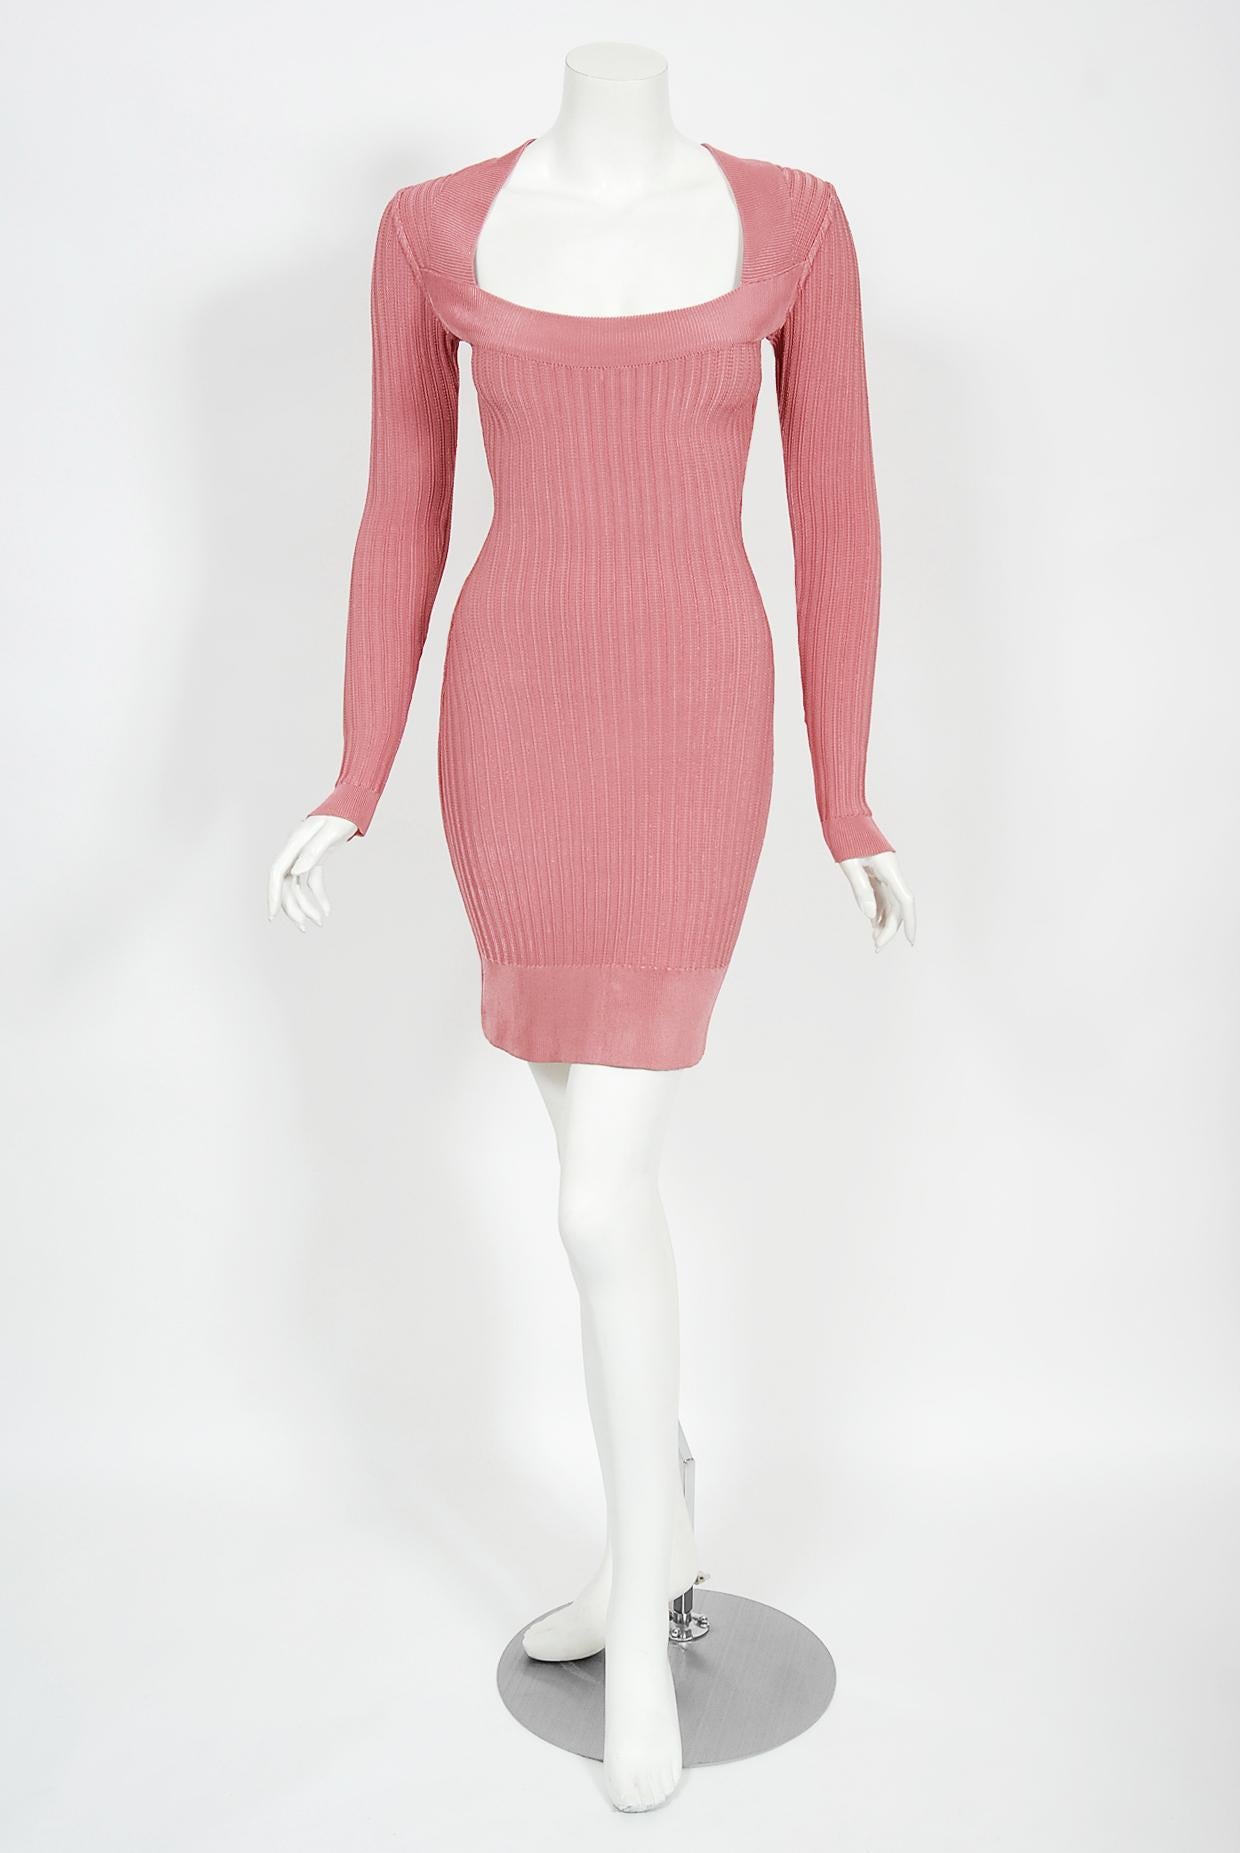 Iconic bodycon ribbed knit rayon dress from Azzedine Alaia's 1990 Fall/Winter runway collection. This blush-pink is such a beautiful and ultra rare color. Also a celebrity favorite; Nicole Richie wore this vintage dress to her premier in 2005!